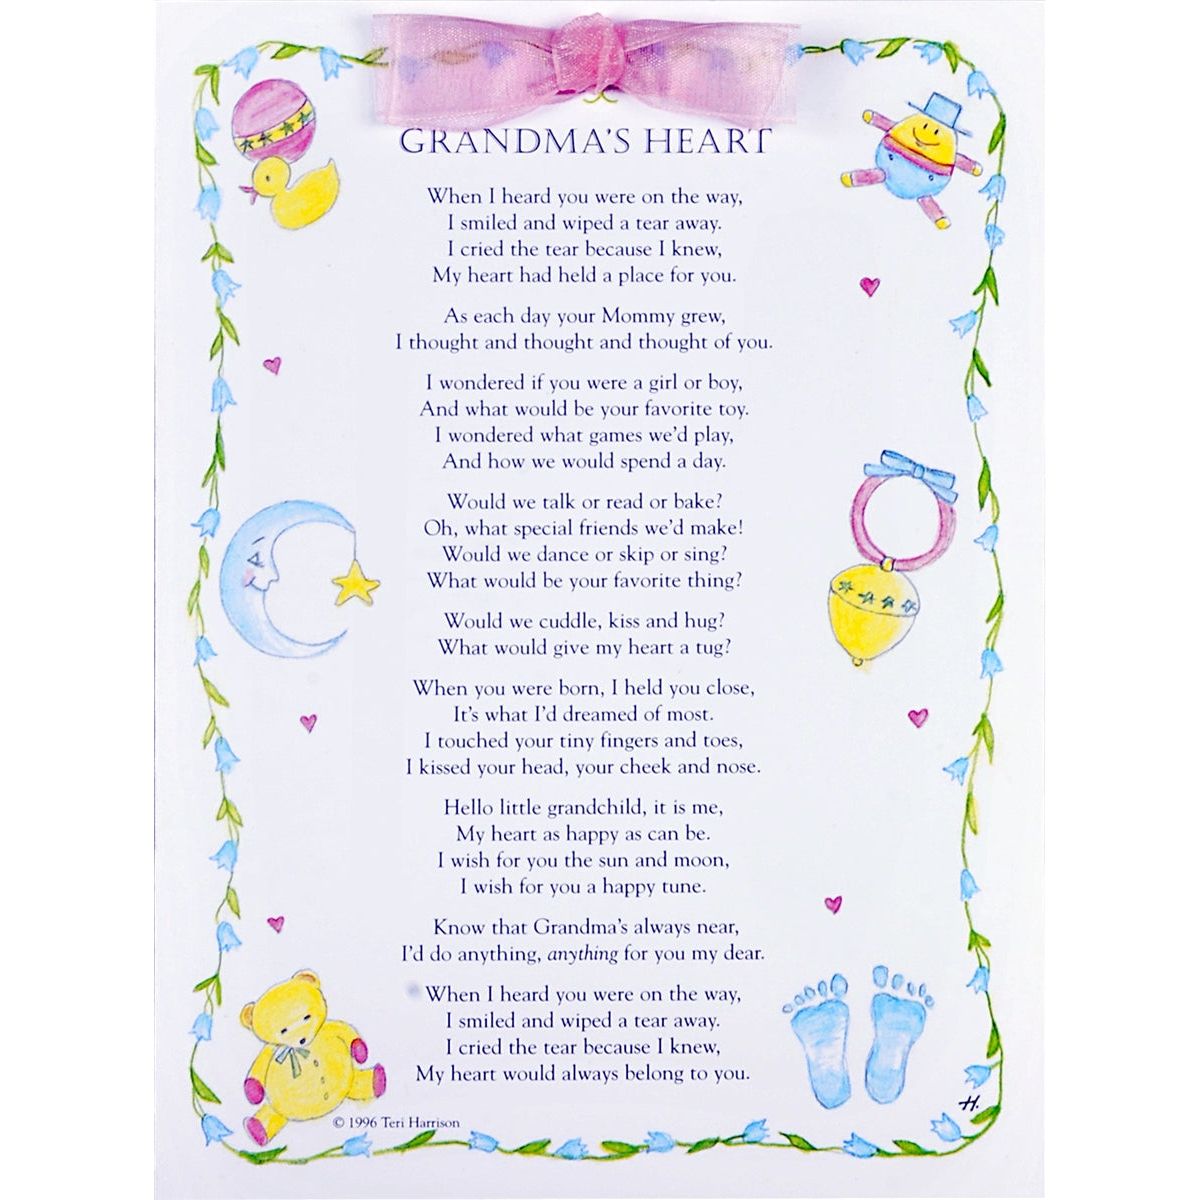 Grandma's Heart poem new baby greeting card 5x7 with envelope and pink organza accent ribbon.